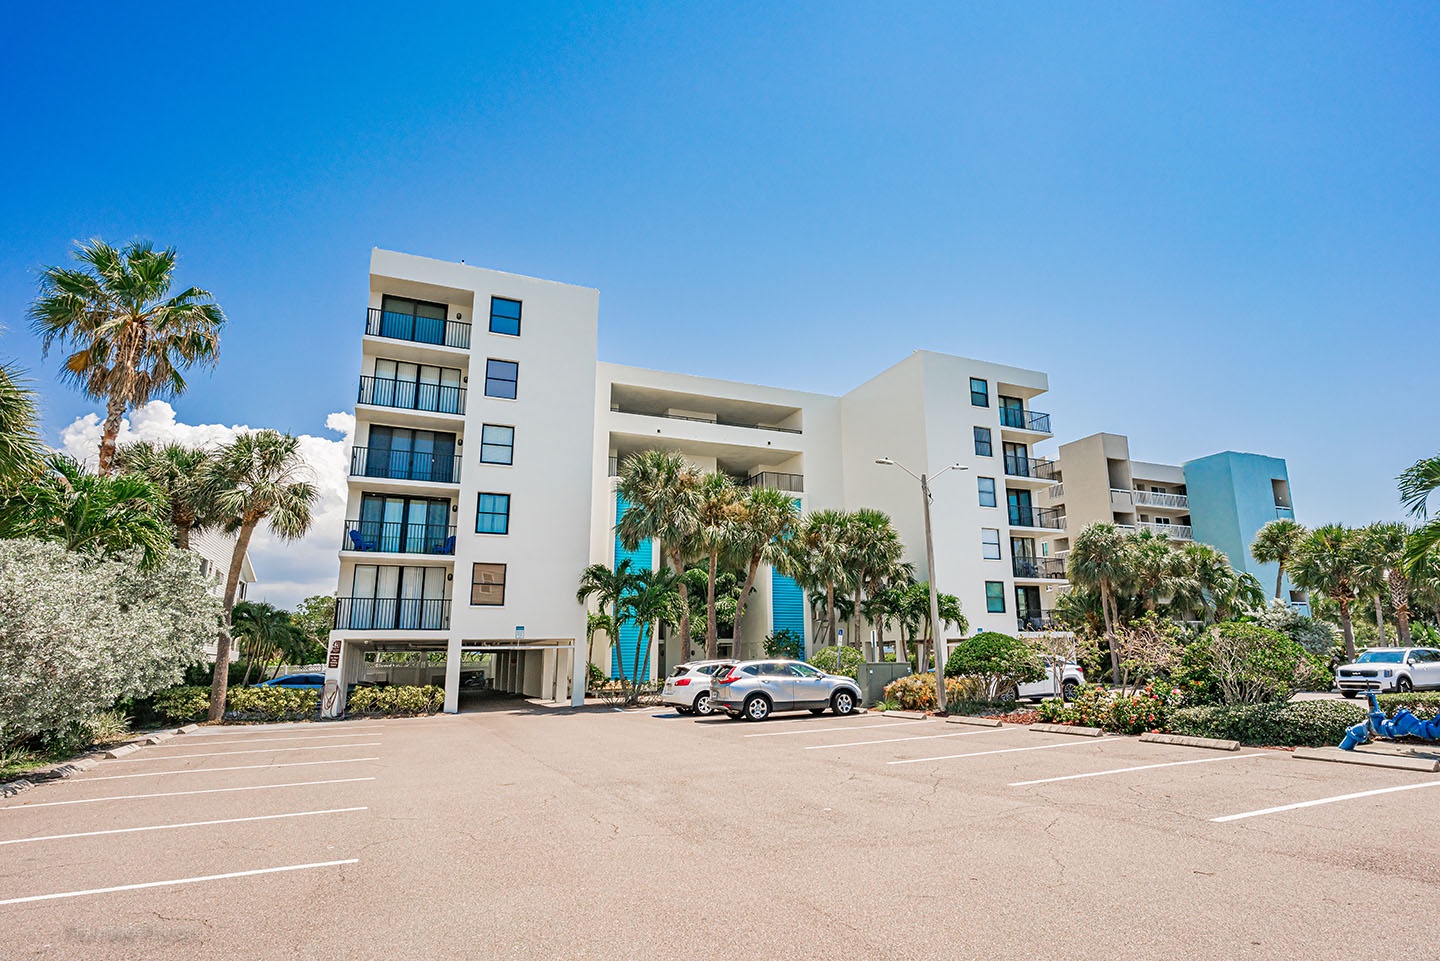 Watch sunsets over the Gulf of Mexico from the Community Sunset Deck on the top floor.